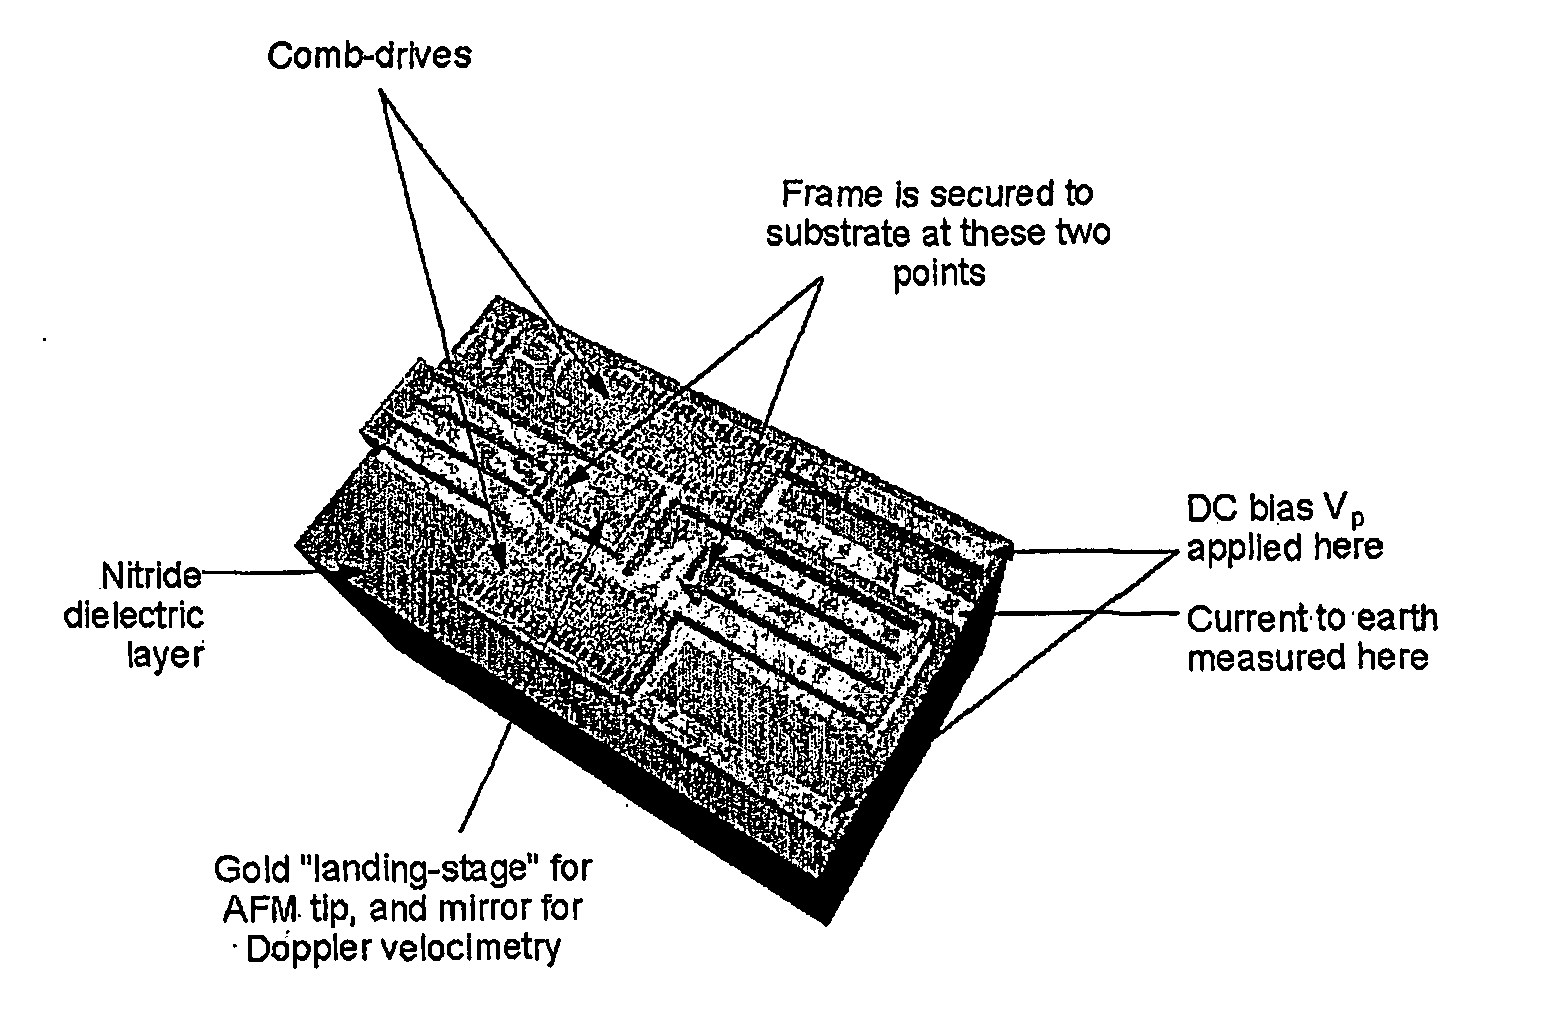 Spring constant calibration device